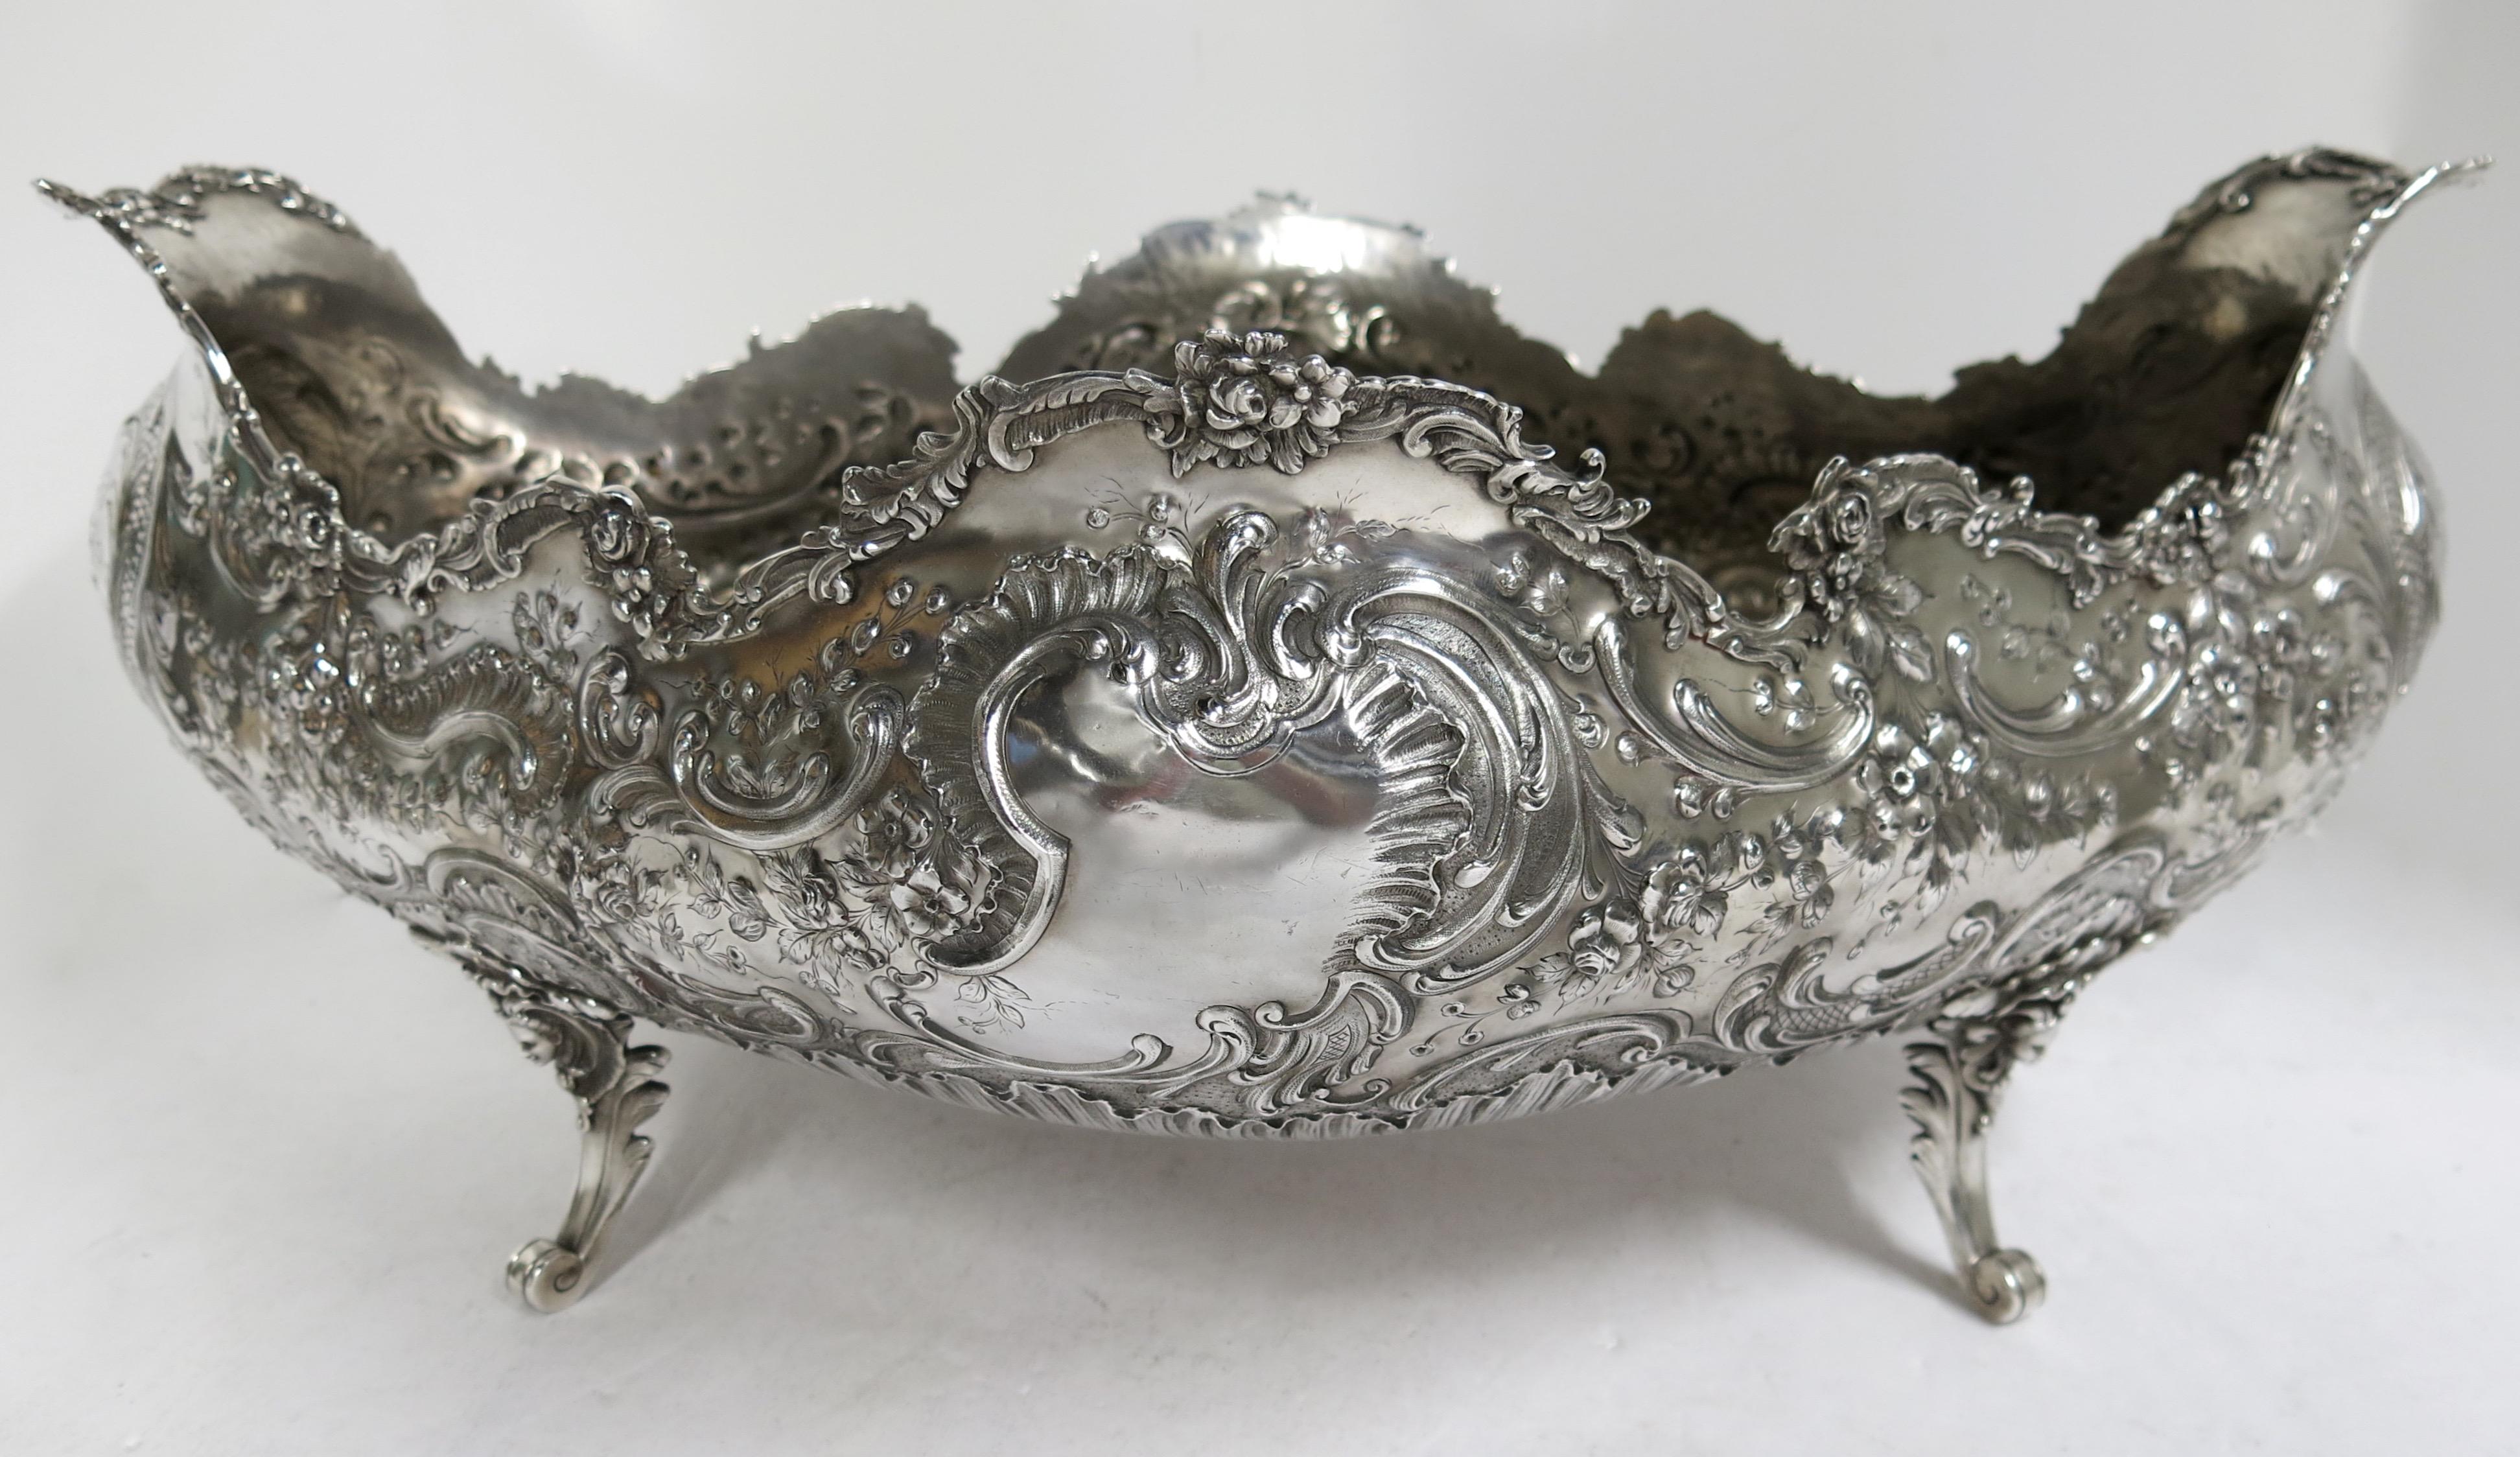 Stunning and Decorative, Large Oval Sterling Silver Antique French Centerpiece 1